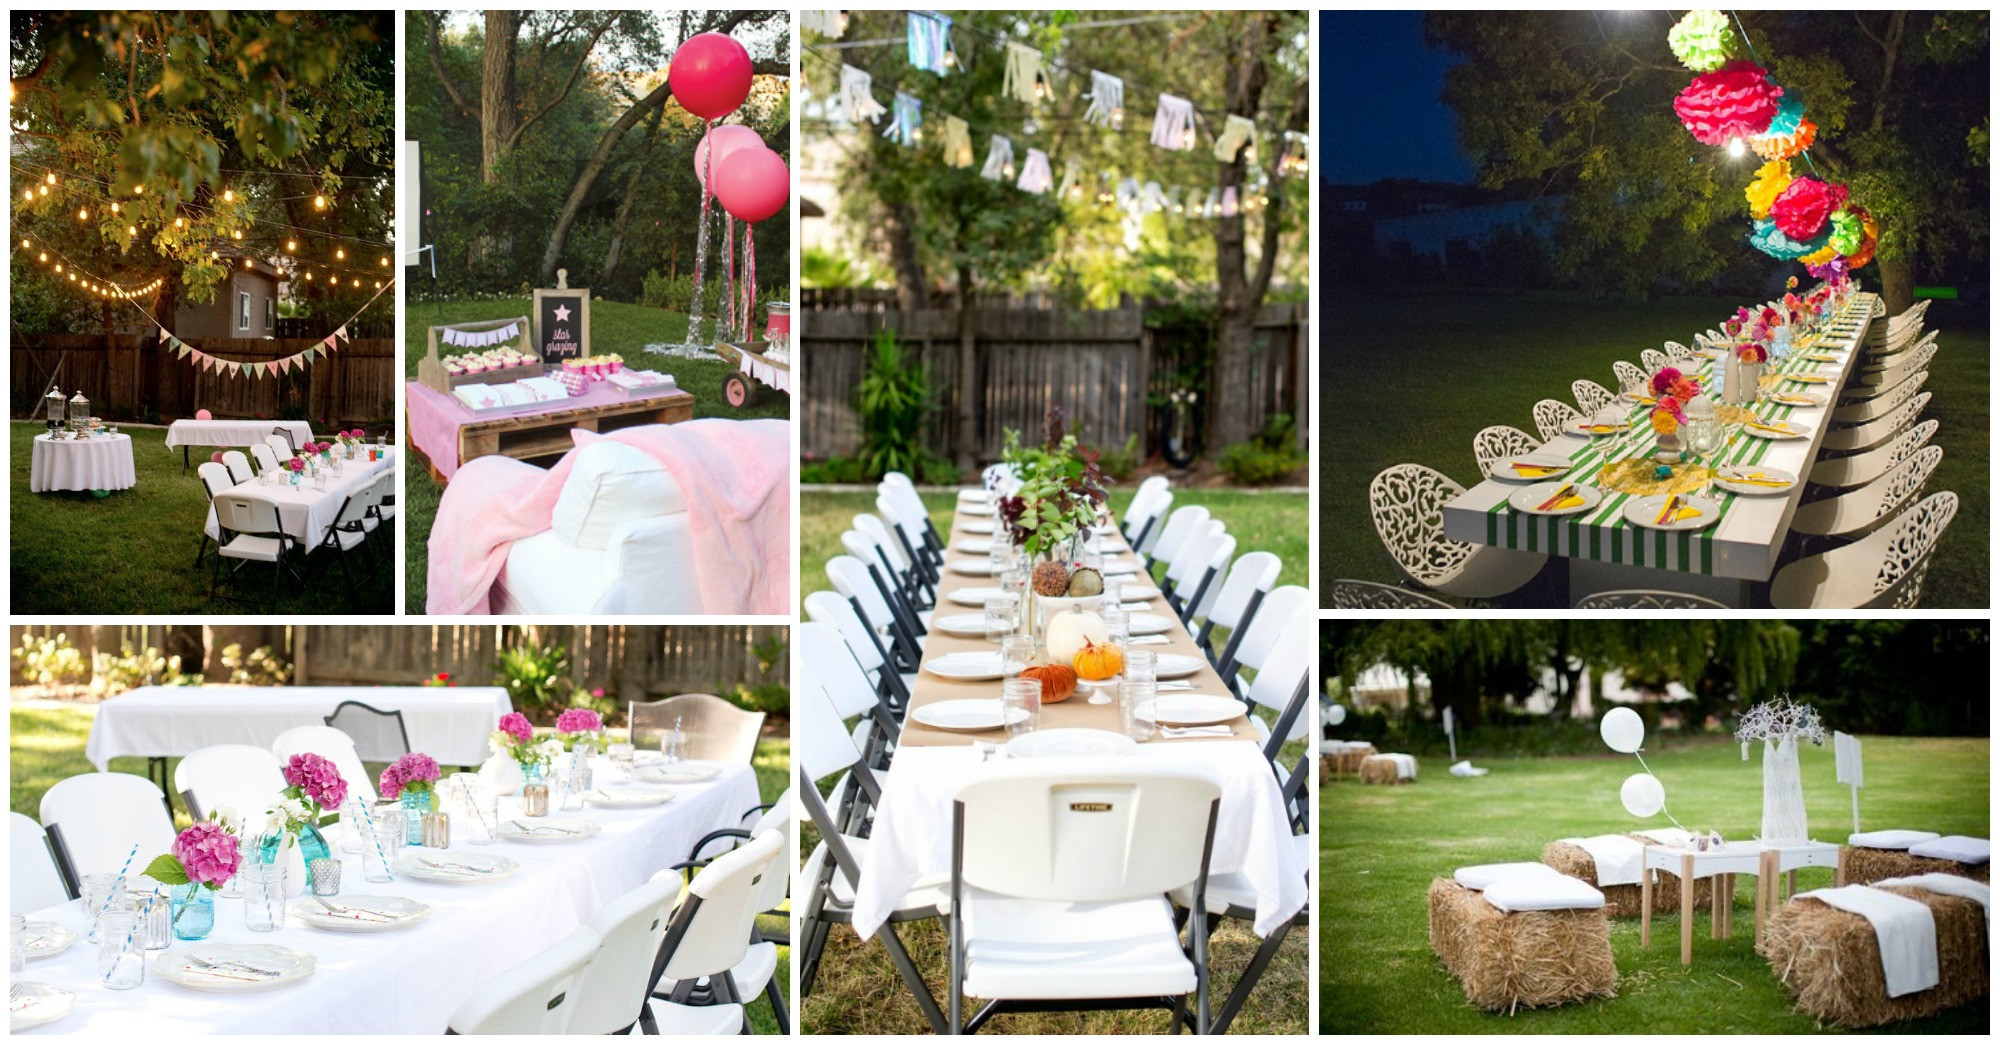 Pinterest Backyard Party Ideas
 Backyard Party Decorations For Unfor table Moments